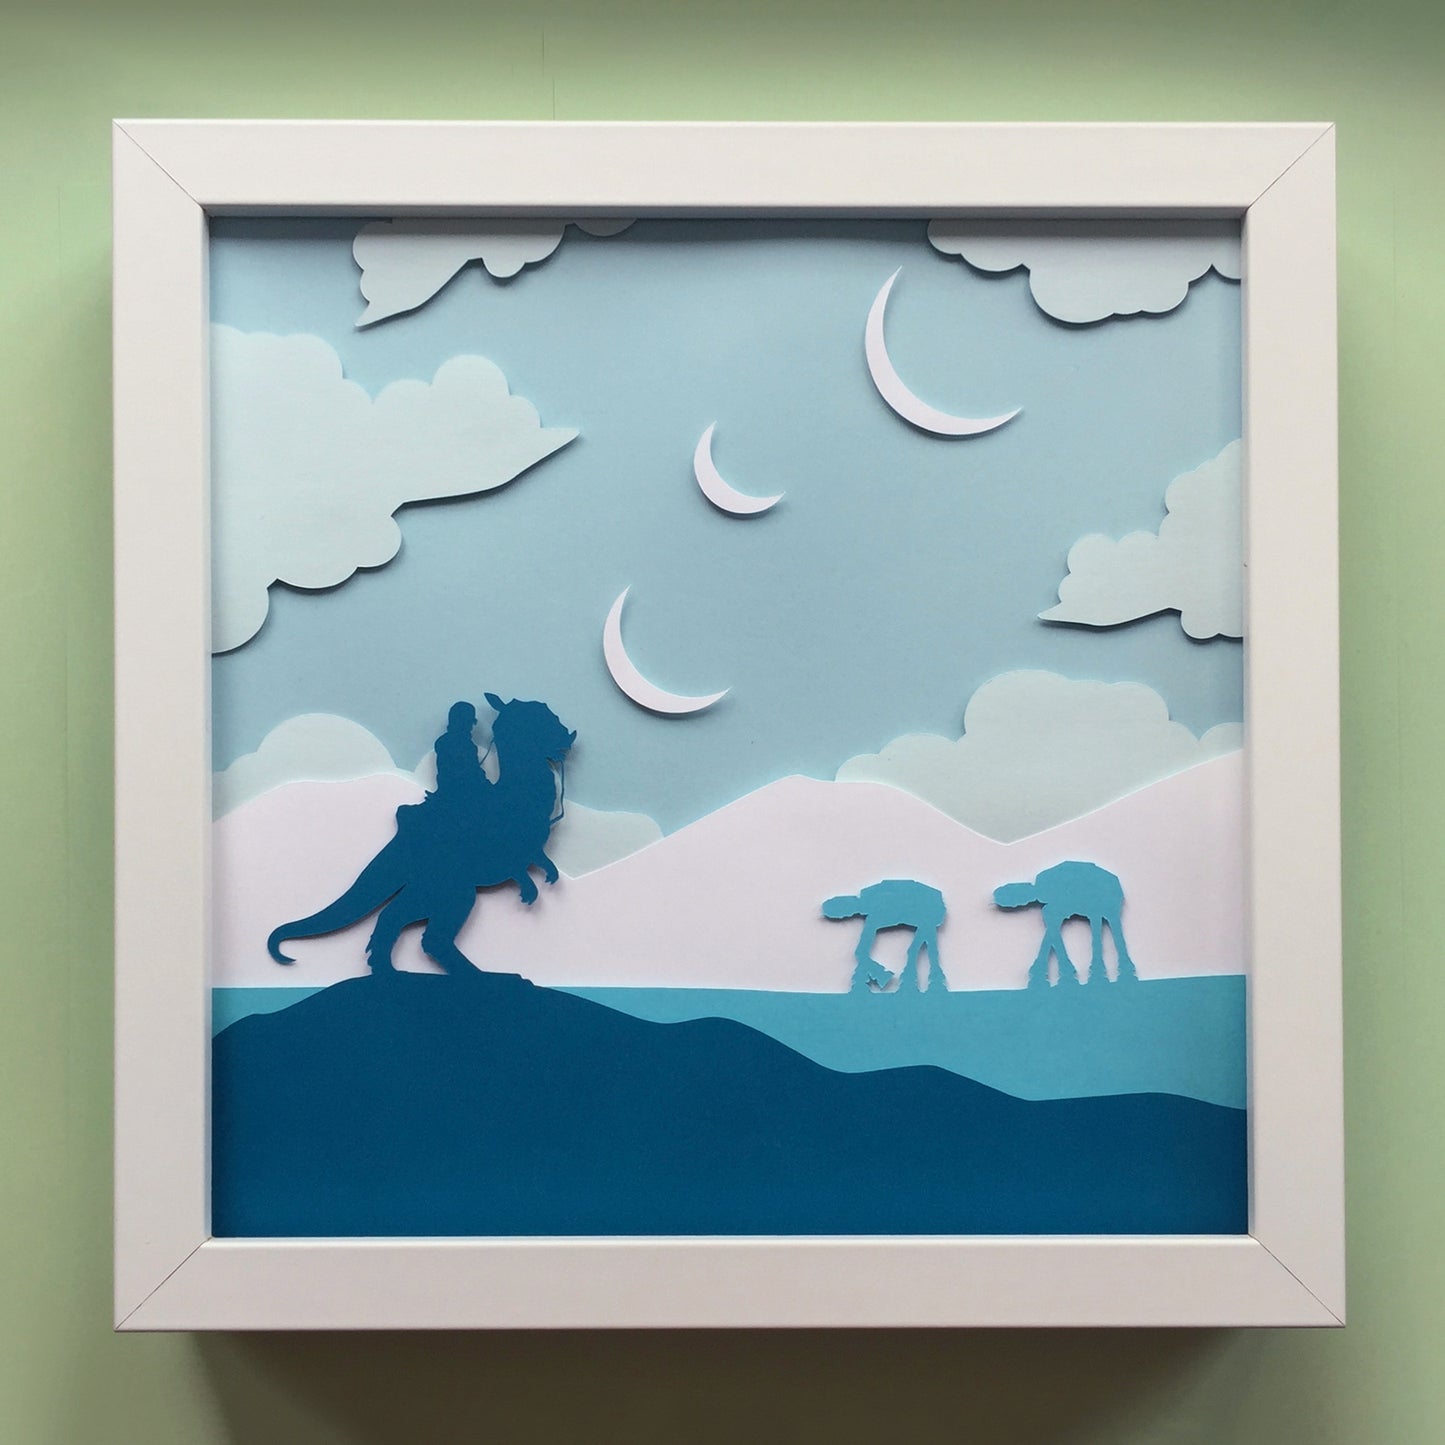 Space Wizards "Hoth" Papercut Art